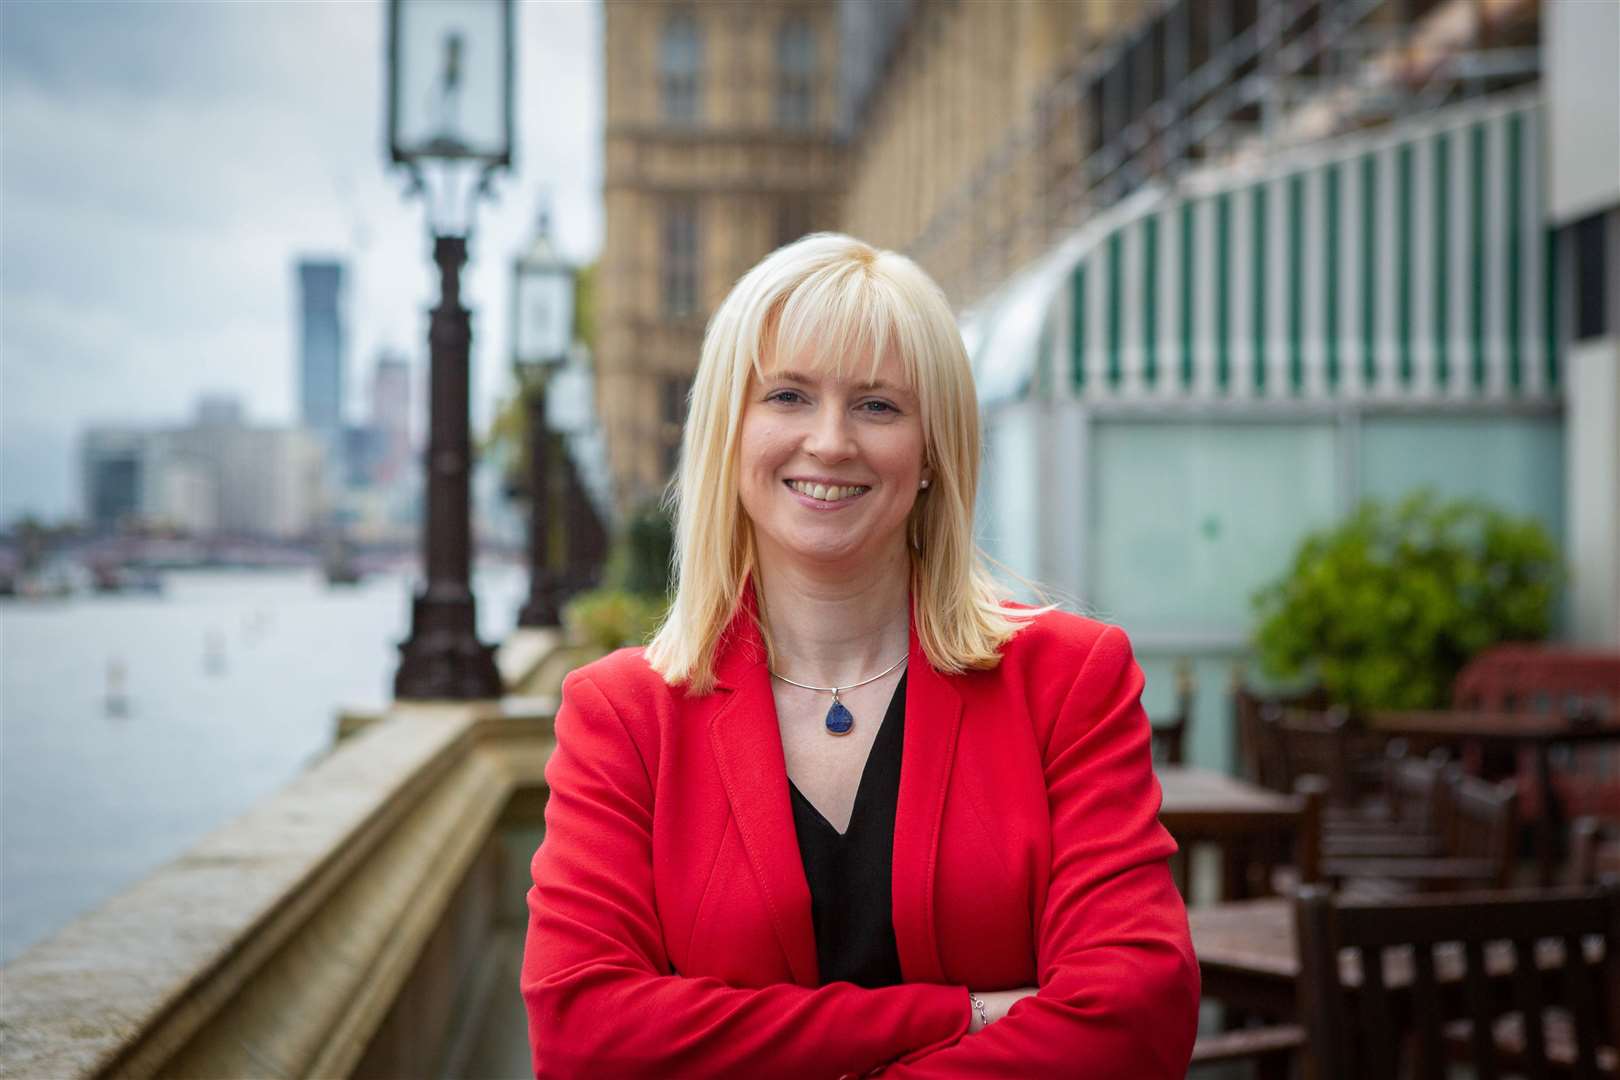 Labour incumbent Rosie Duffield won a majority of just 187 in 2017